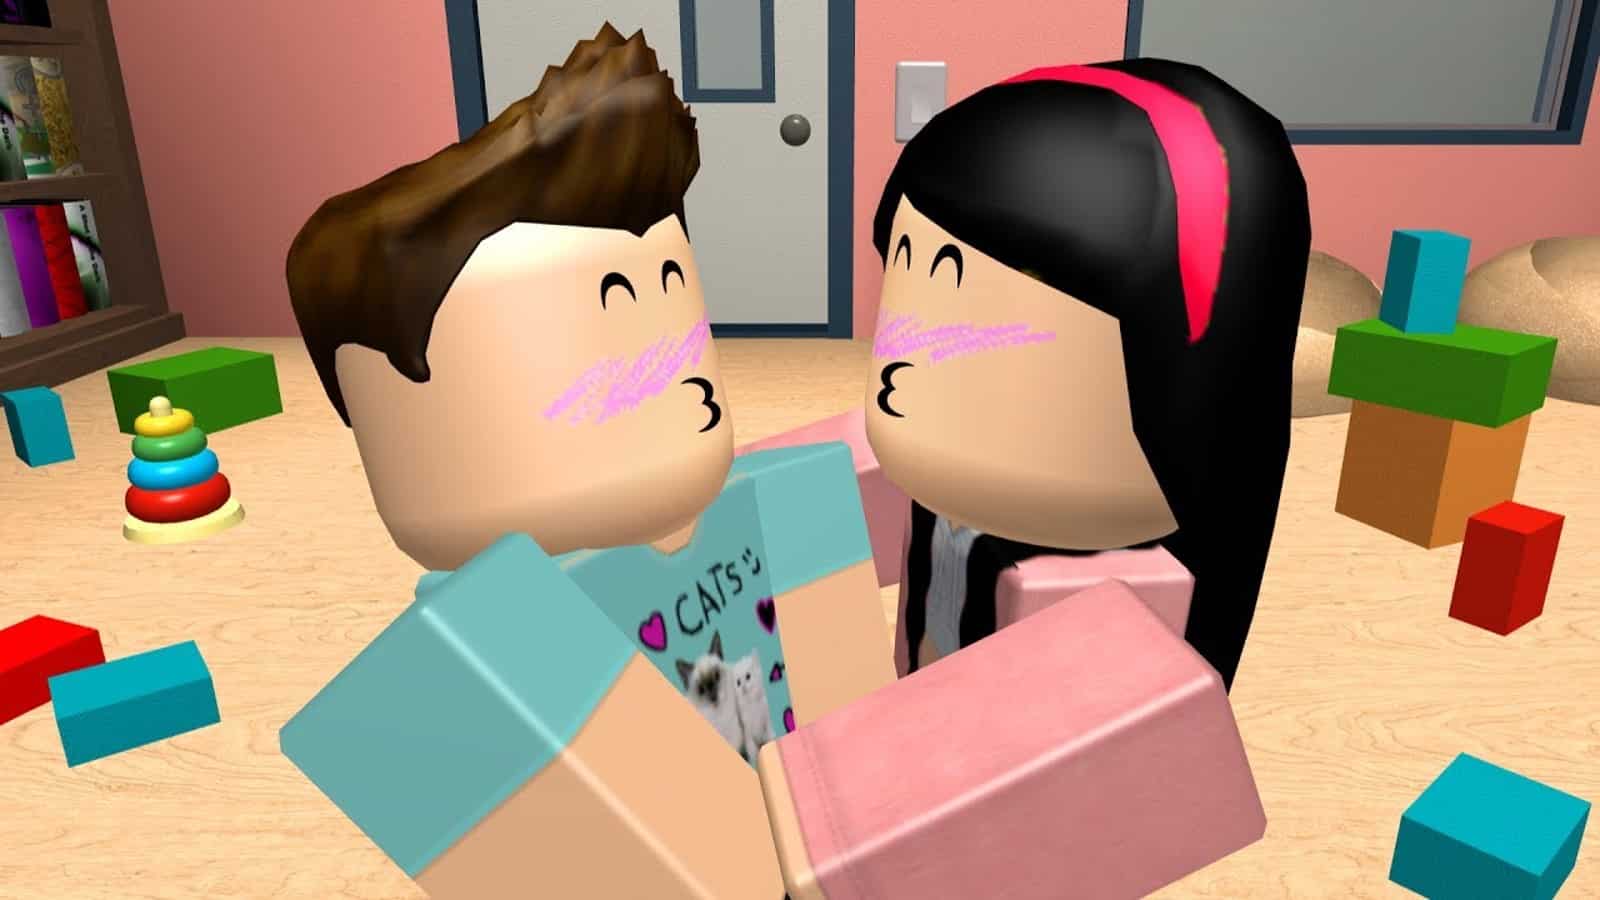 Roblox TOS update banning kissing and handholding leaves